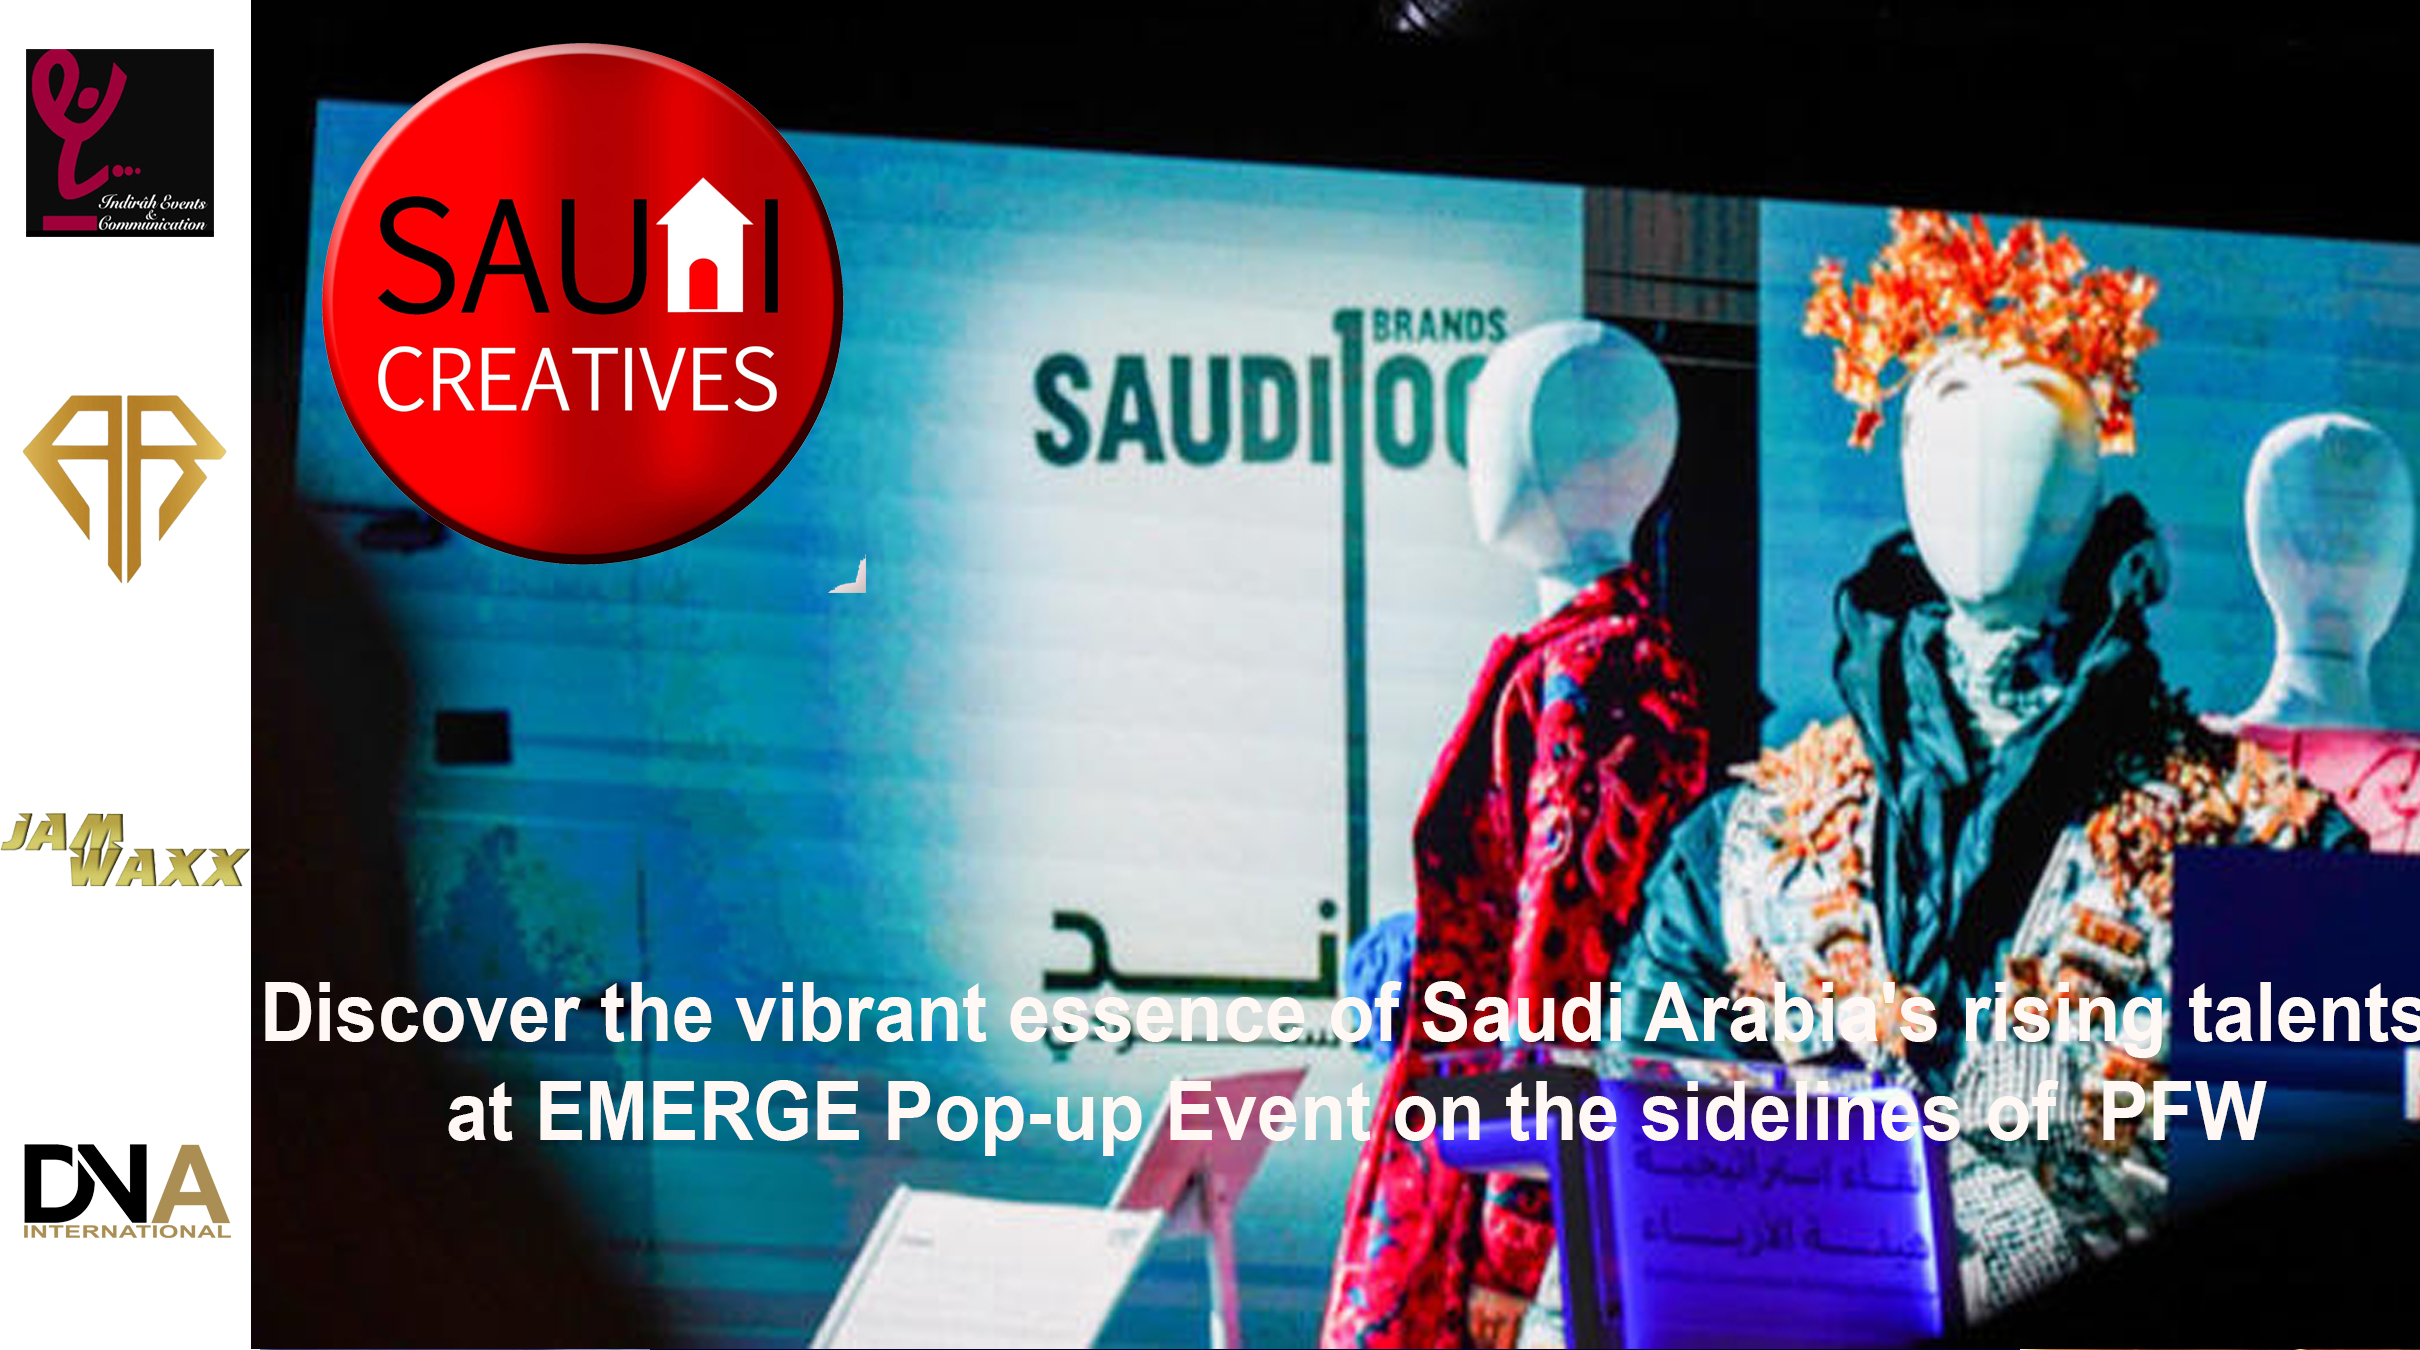 AFRICA-VOGUE-COVER-Discover-the-vibrant-essence-of-Saudi-Arabia's-rising-talents-at-EMERGE-DN-AFRICA-DN-A-INTERNATIONAL-Media-Partner